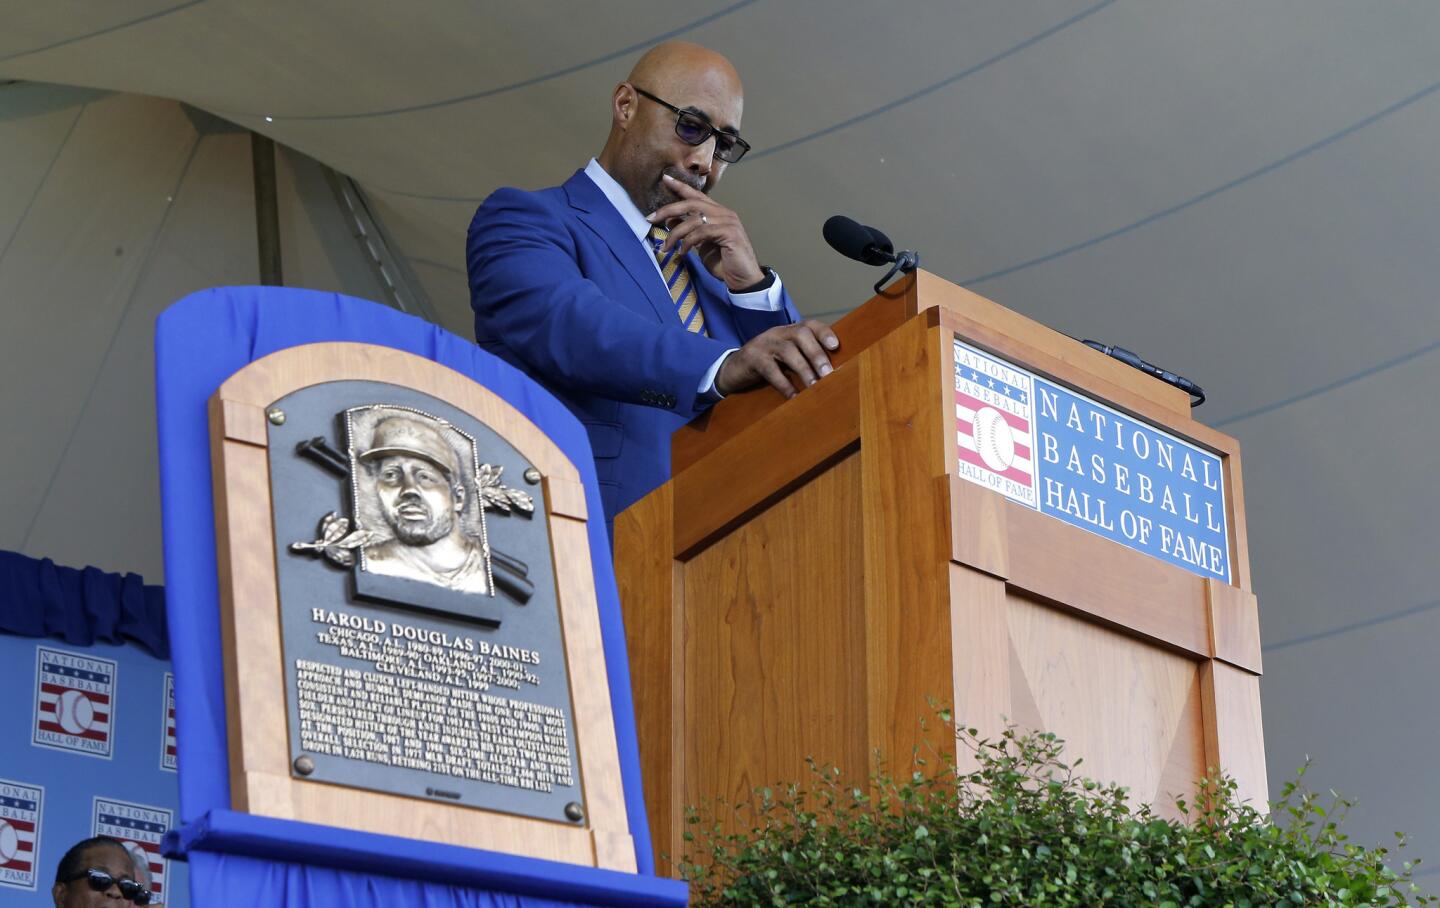 COOPERSTOWN, NEW YORK - JULY 21: Harold Baines gives his speech during the Baseball Hall of Fame induction ceremony at Clark Sports Center on July 21, 2019 in Cooperstown, New York. (Photo by Jim McIsaac/Getty Images) ** OUTS - ELSENT, FPG, CM - OUTS * NM, PH, VA if sourced by CT, LA or MoD **